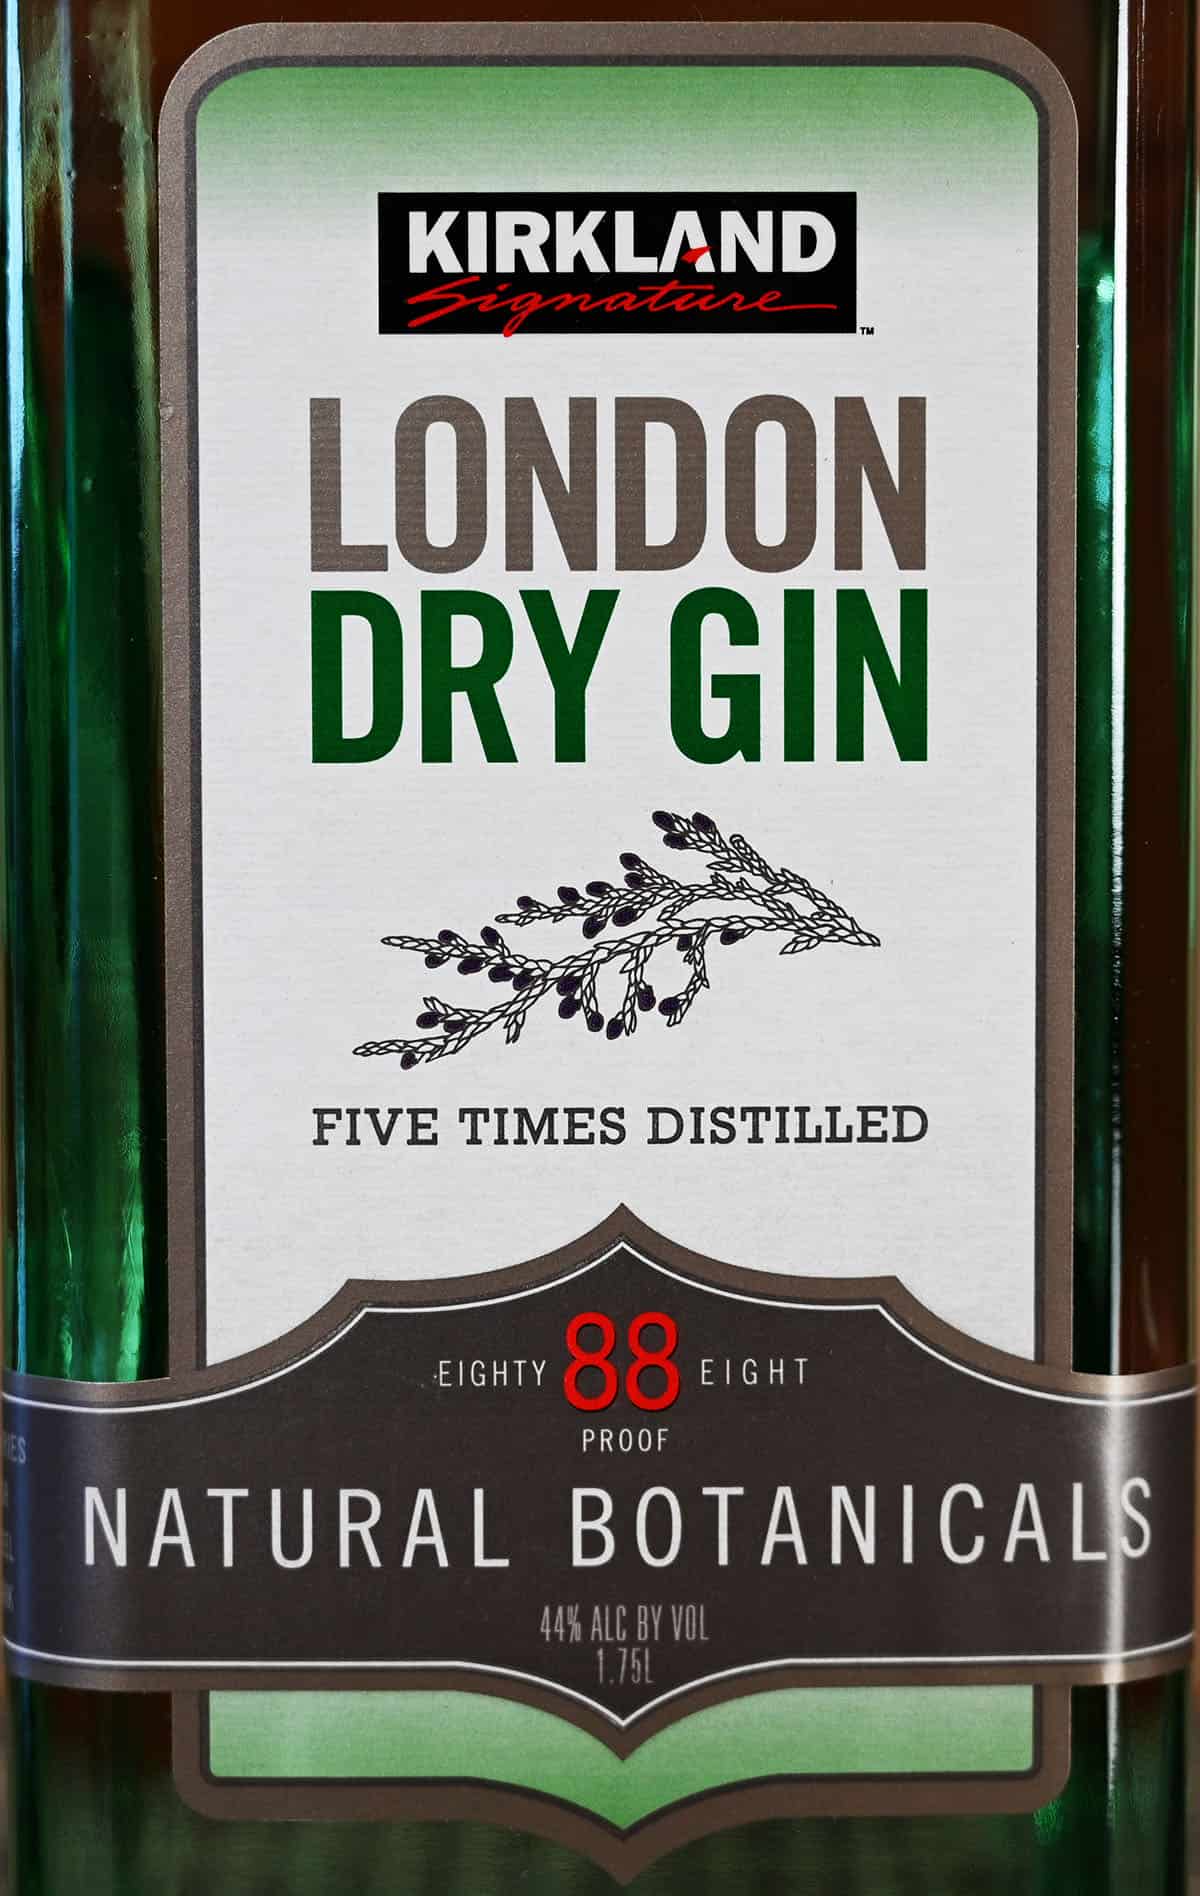 Closeup image of the front label of the Kirkland Signature London Dry Gin.